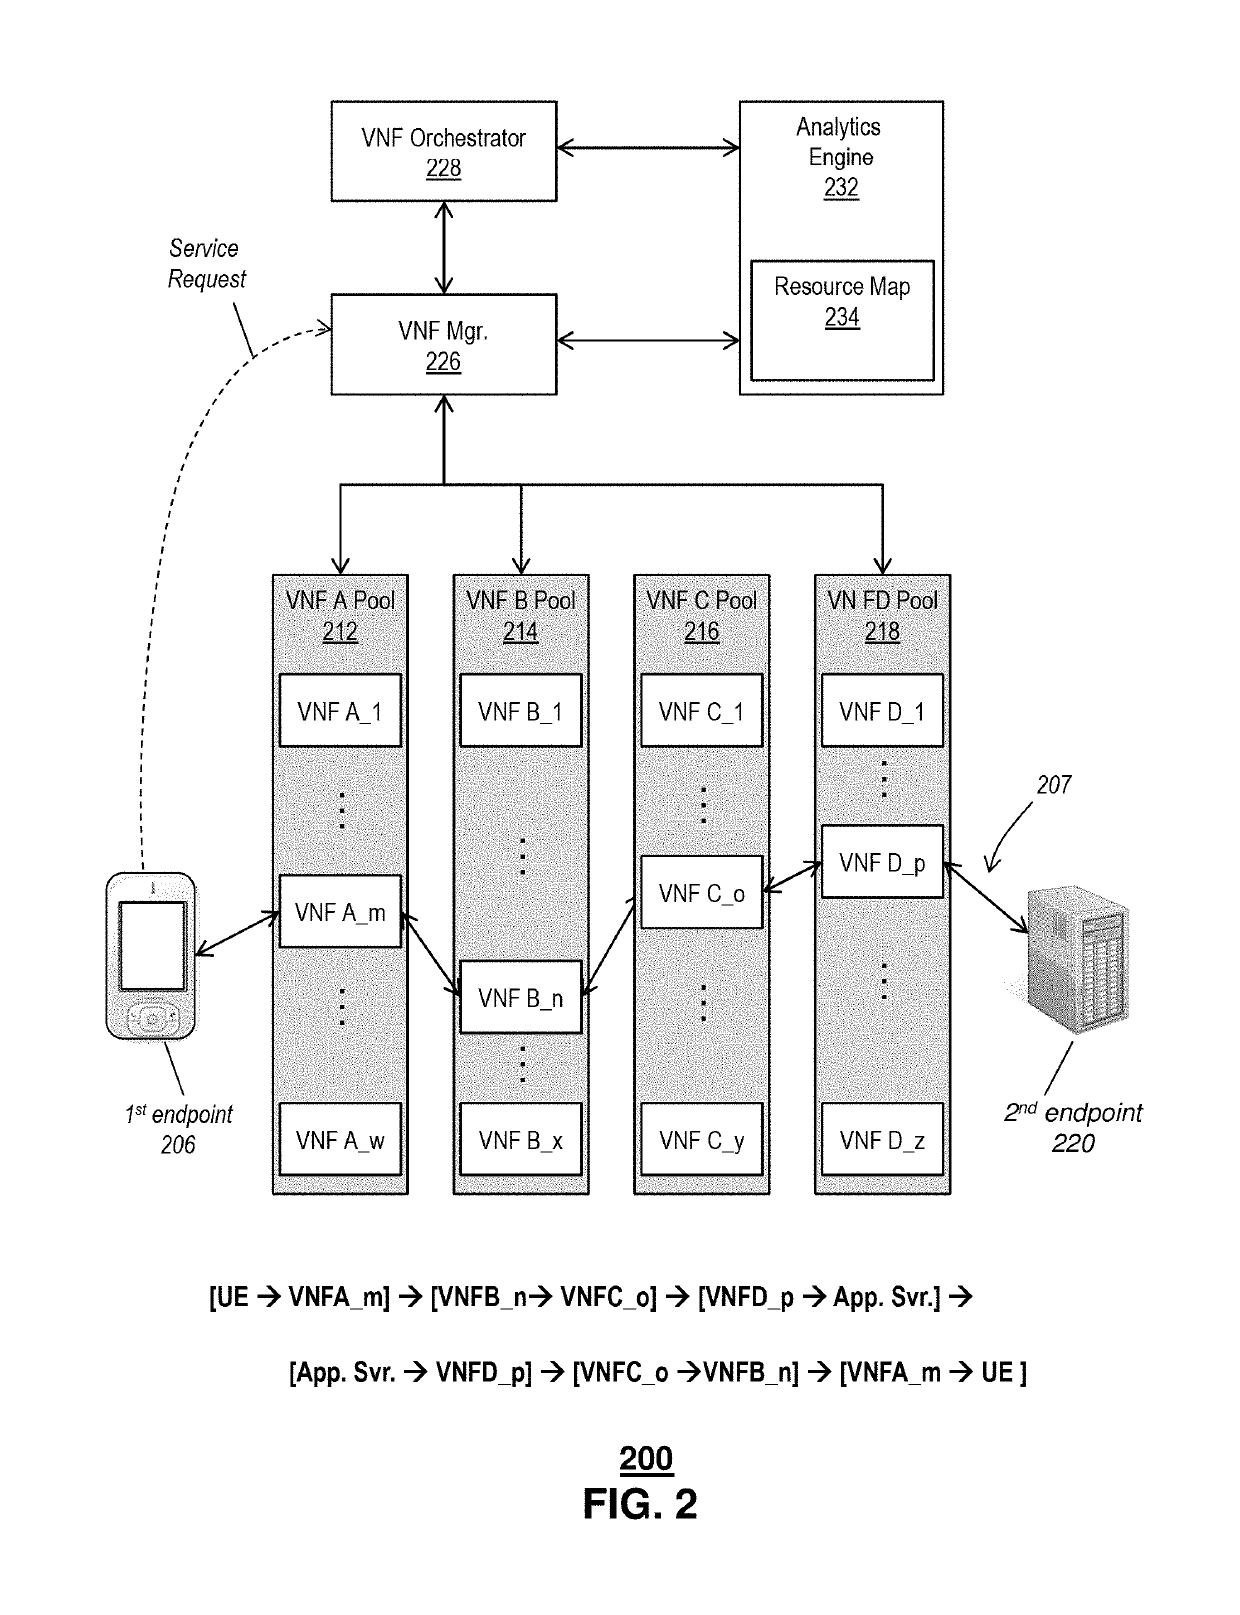 Intelligent Analytics Virtual Network Orchestration System And Method